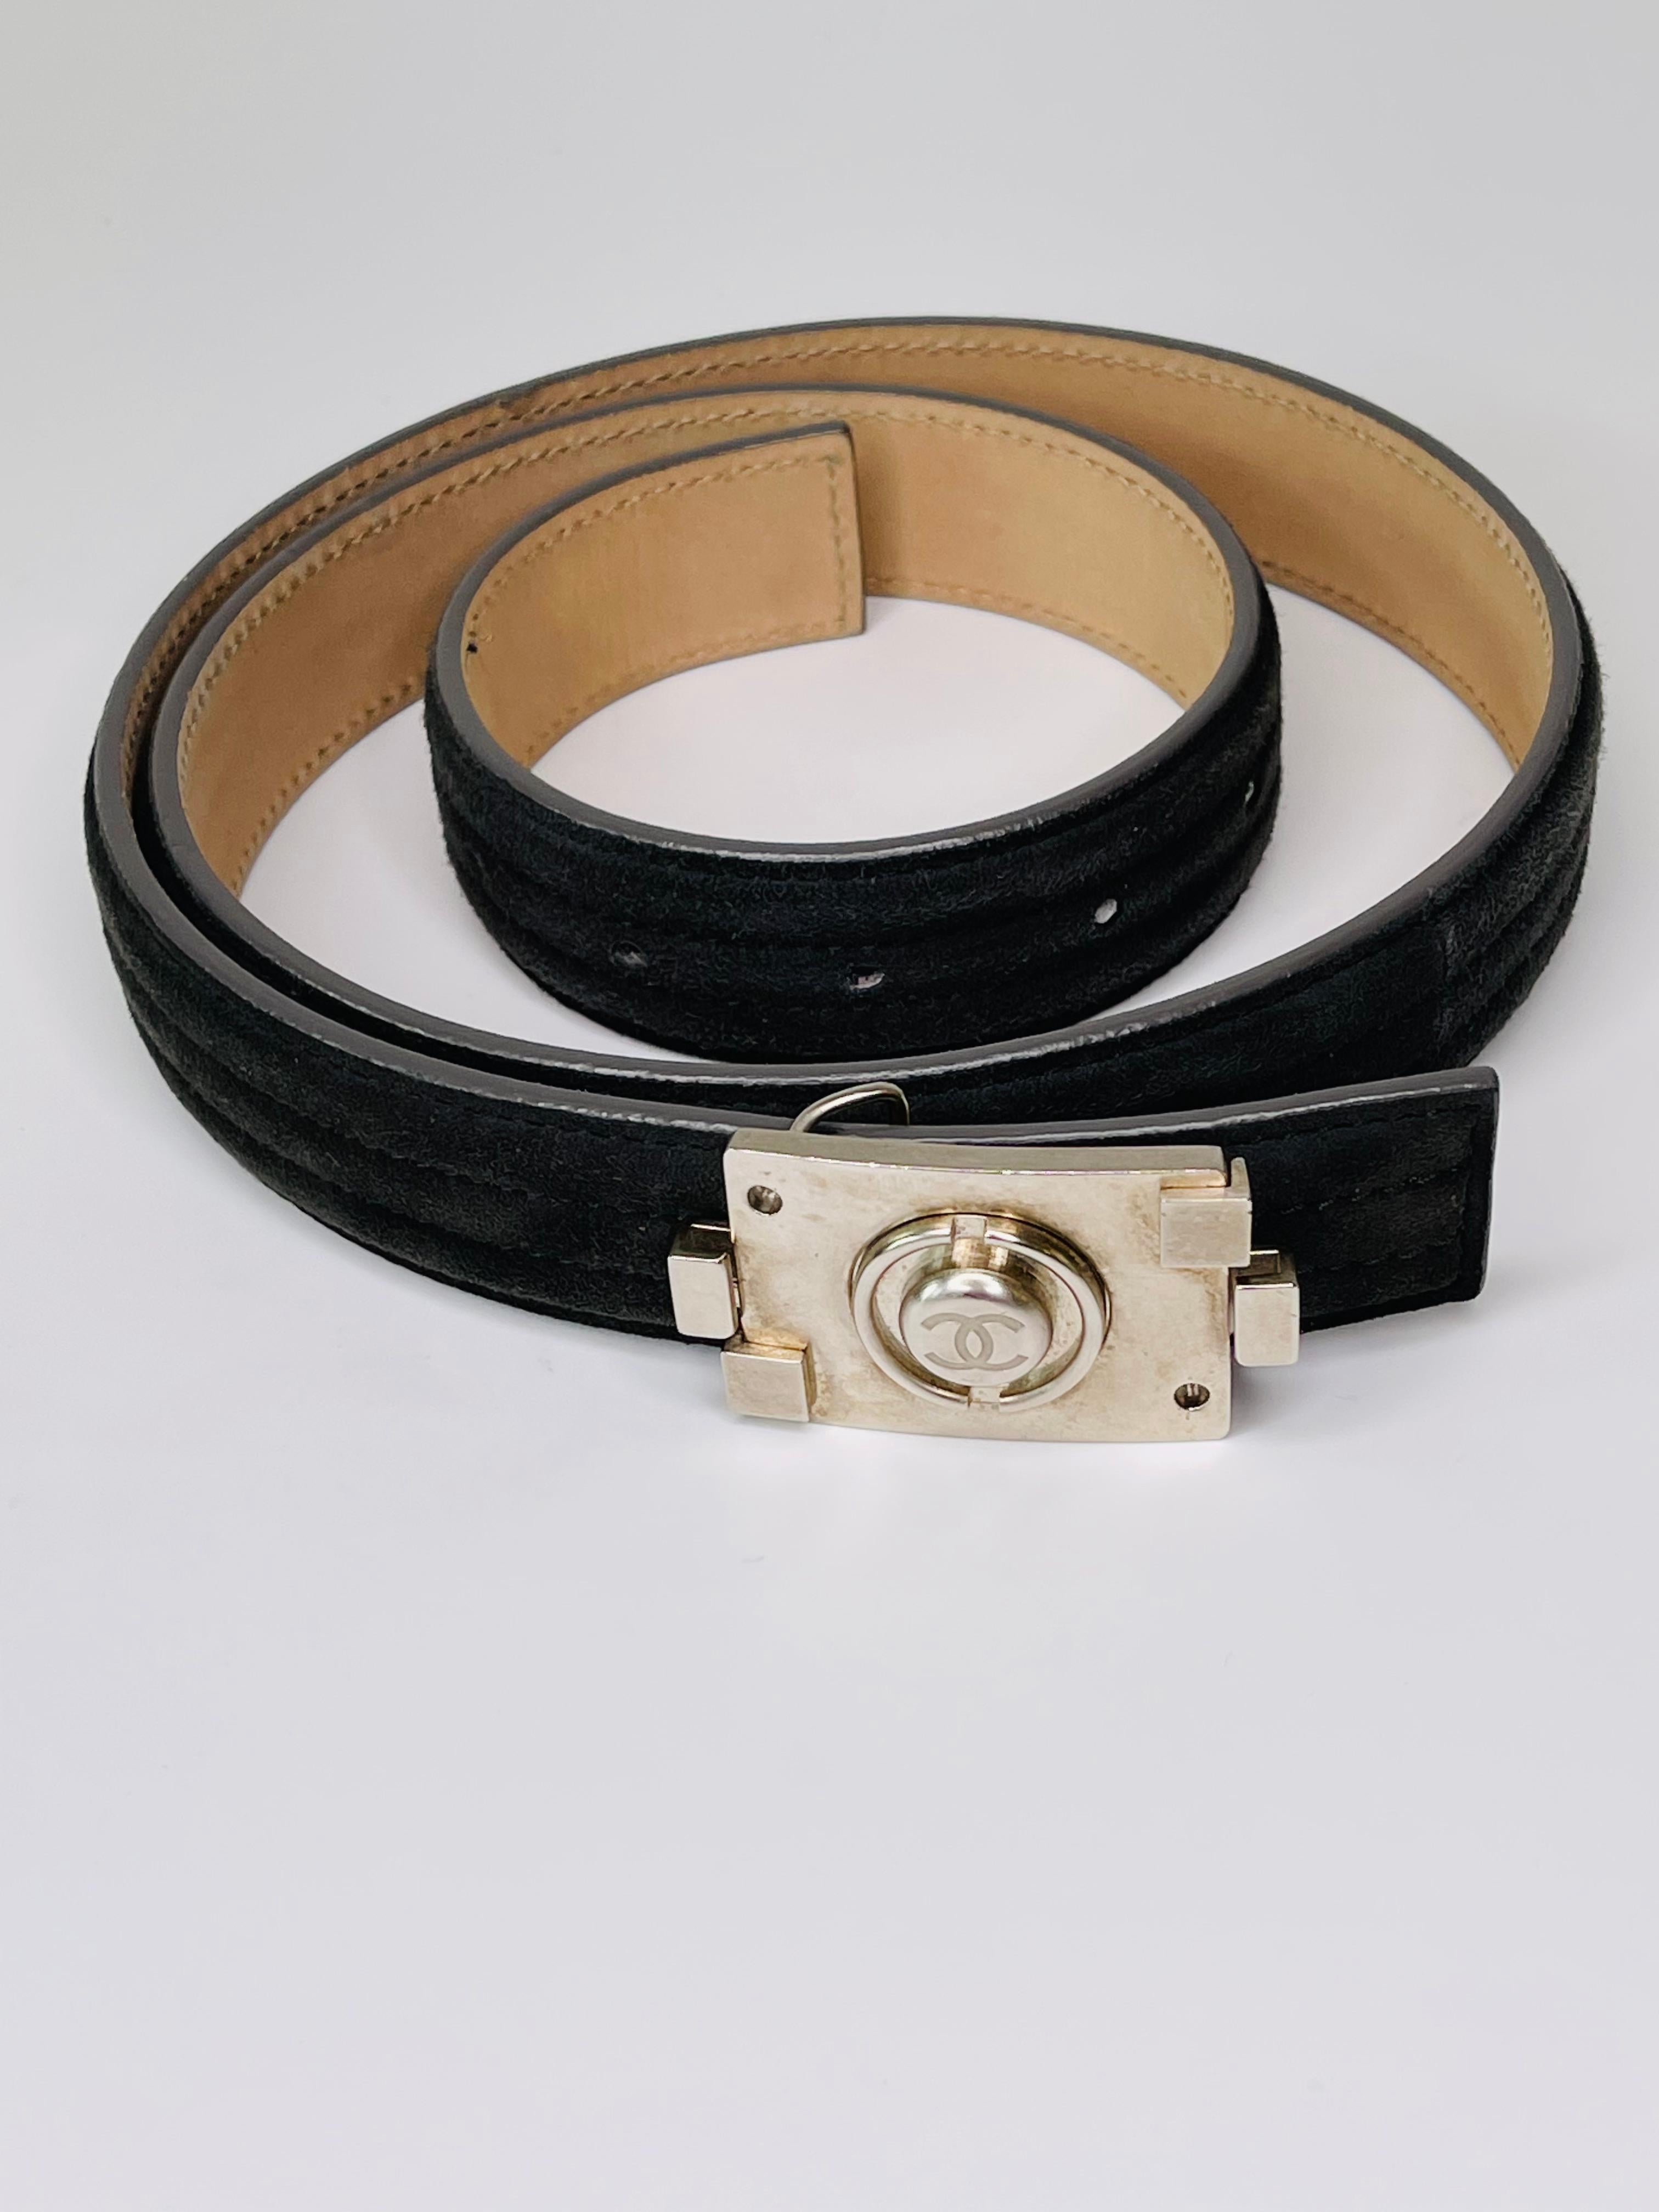 From the Pre-Fall 2012 Collection. Grey quilted suede Chanel Boy belt with silver-tone hardware, interlocking CC buckle and peg-in-hole closure.

COLOR: Grey
MATERIAL: Suede
ITEM CODE: B12-A
MEASURES: L 40” x W 1”
SIZE: 95/38
CONDITION: Fair